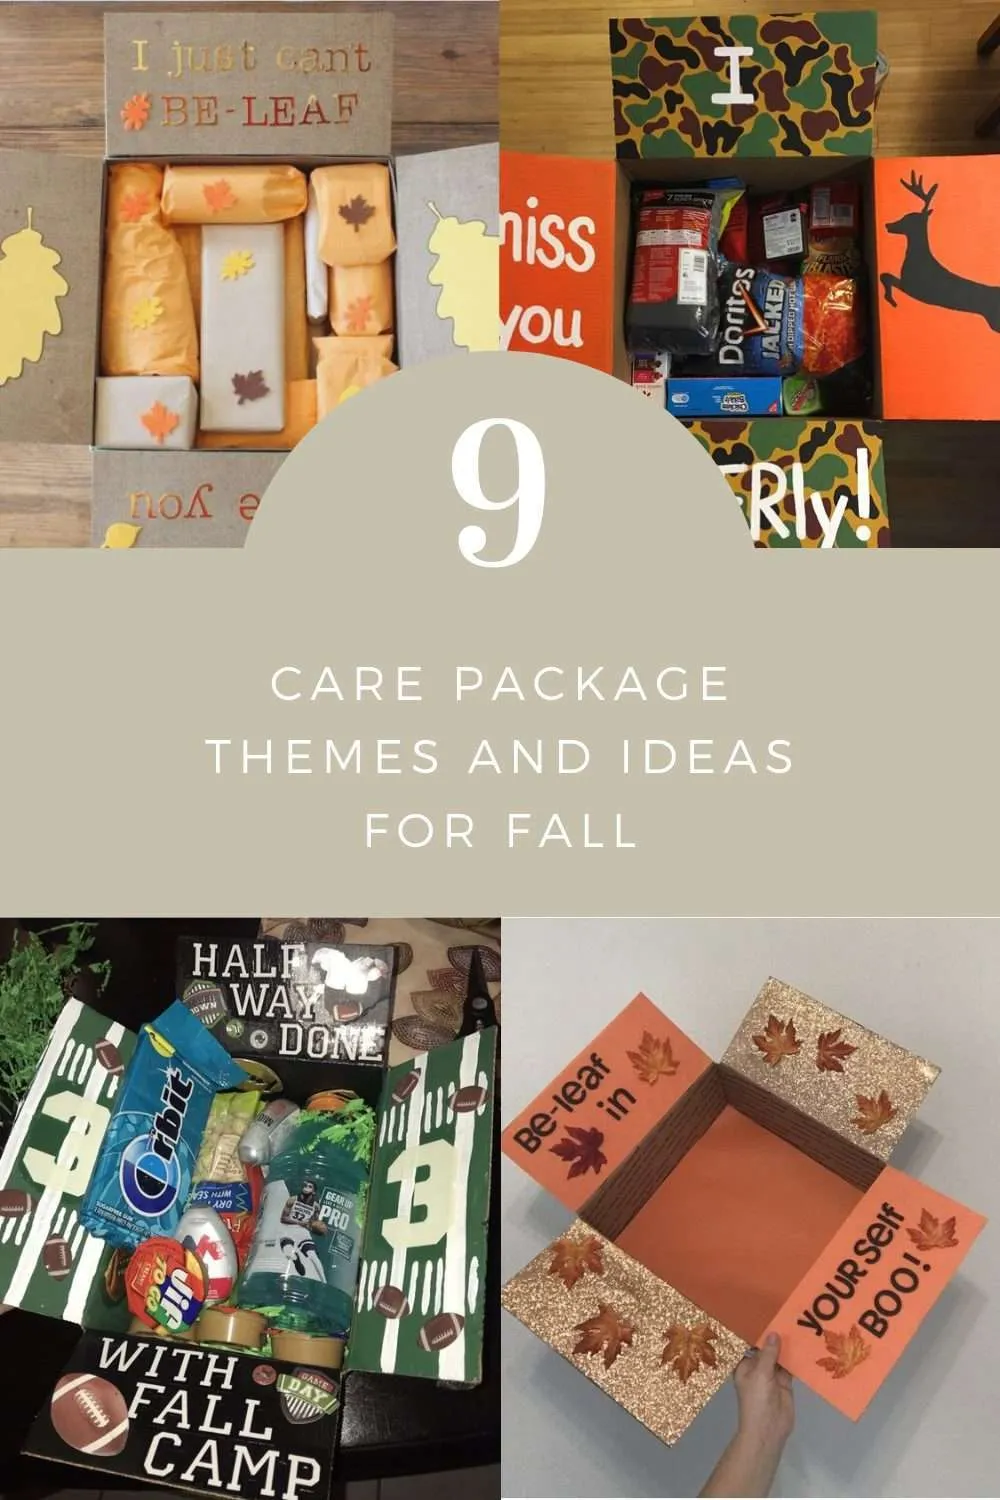 9 Care Package Themes and Ideas for Fall | Finding Mandee